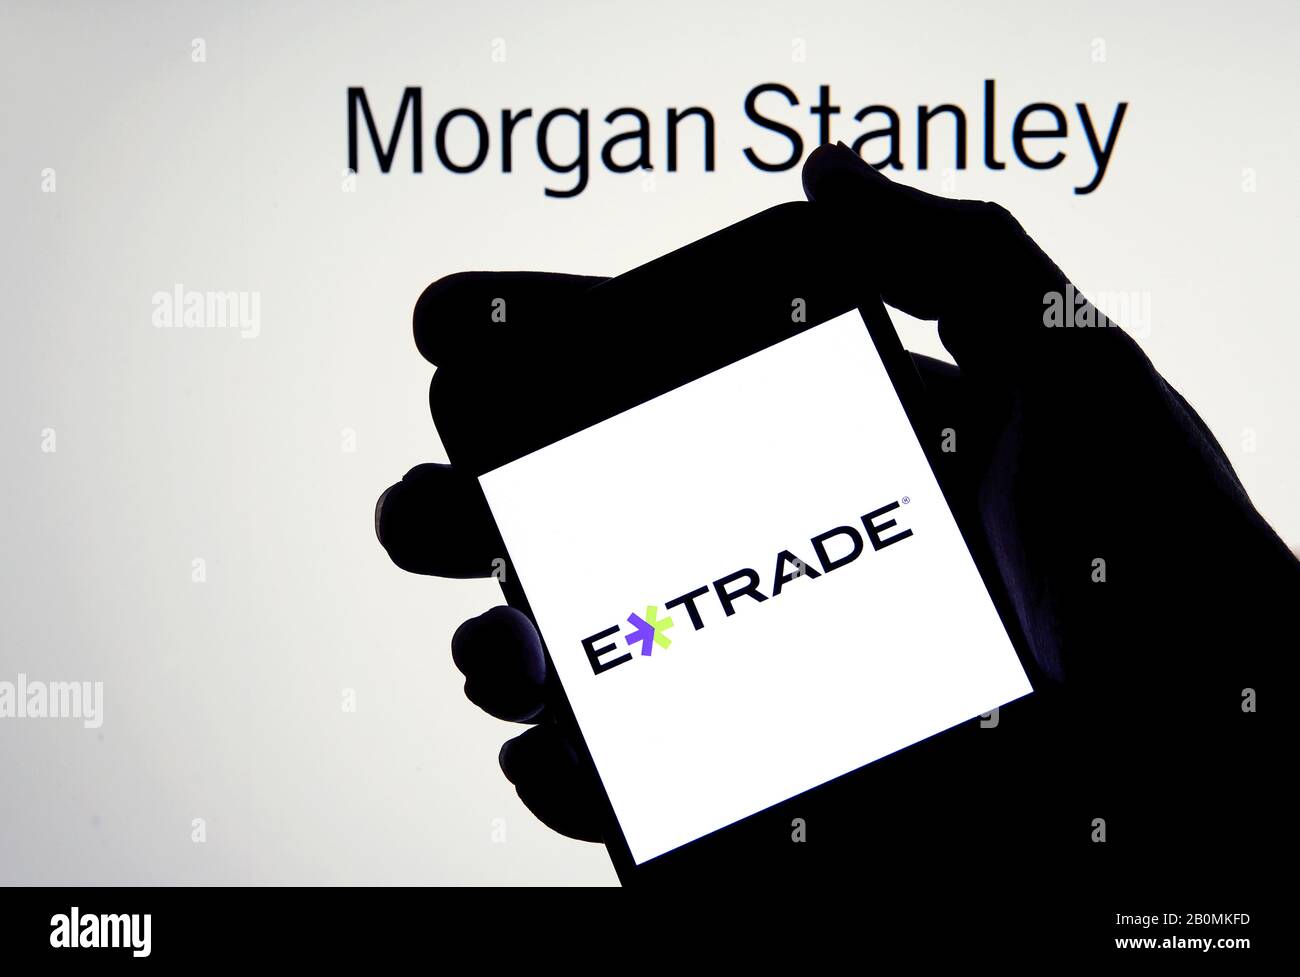 E-trade logo on a smartphone in a hand with Morgan Stanley on the blurred background. Concept for company acquisition. Real photo, not a montage. Stock Photo